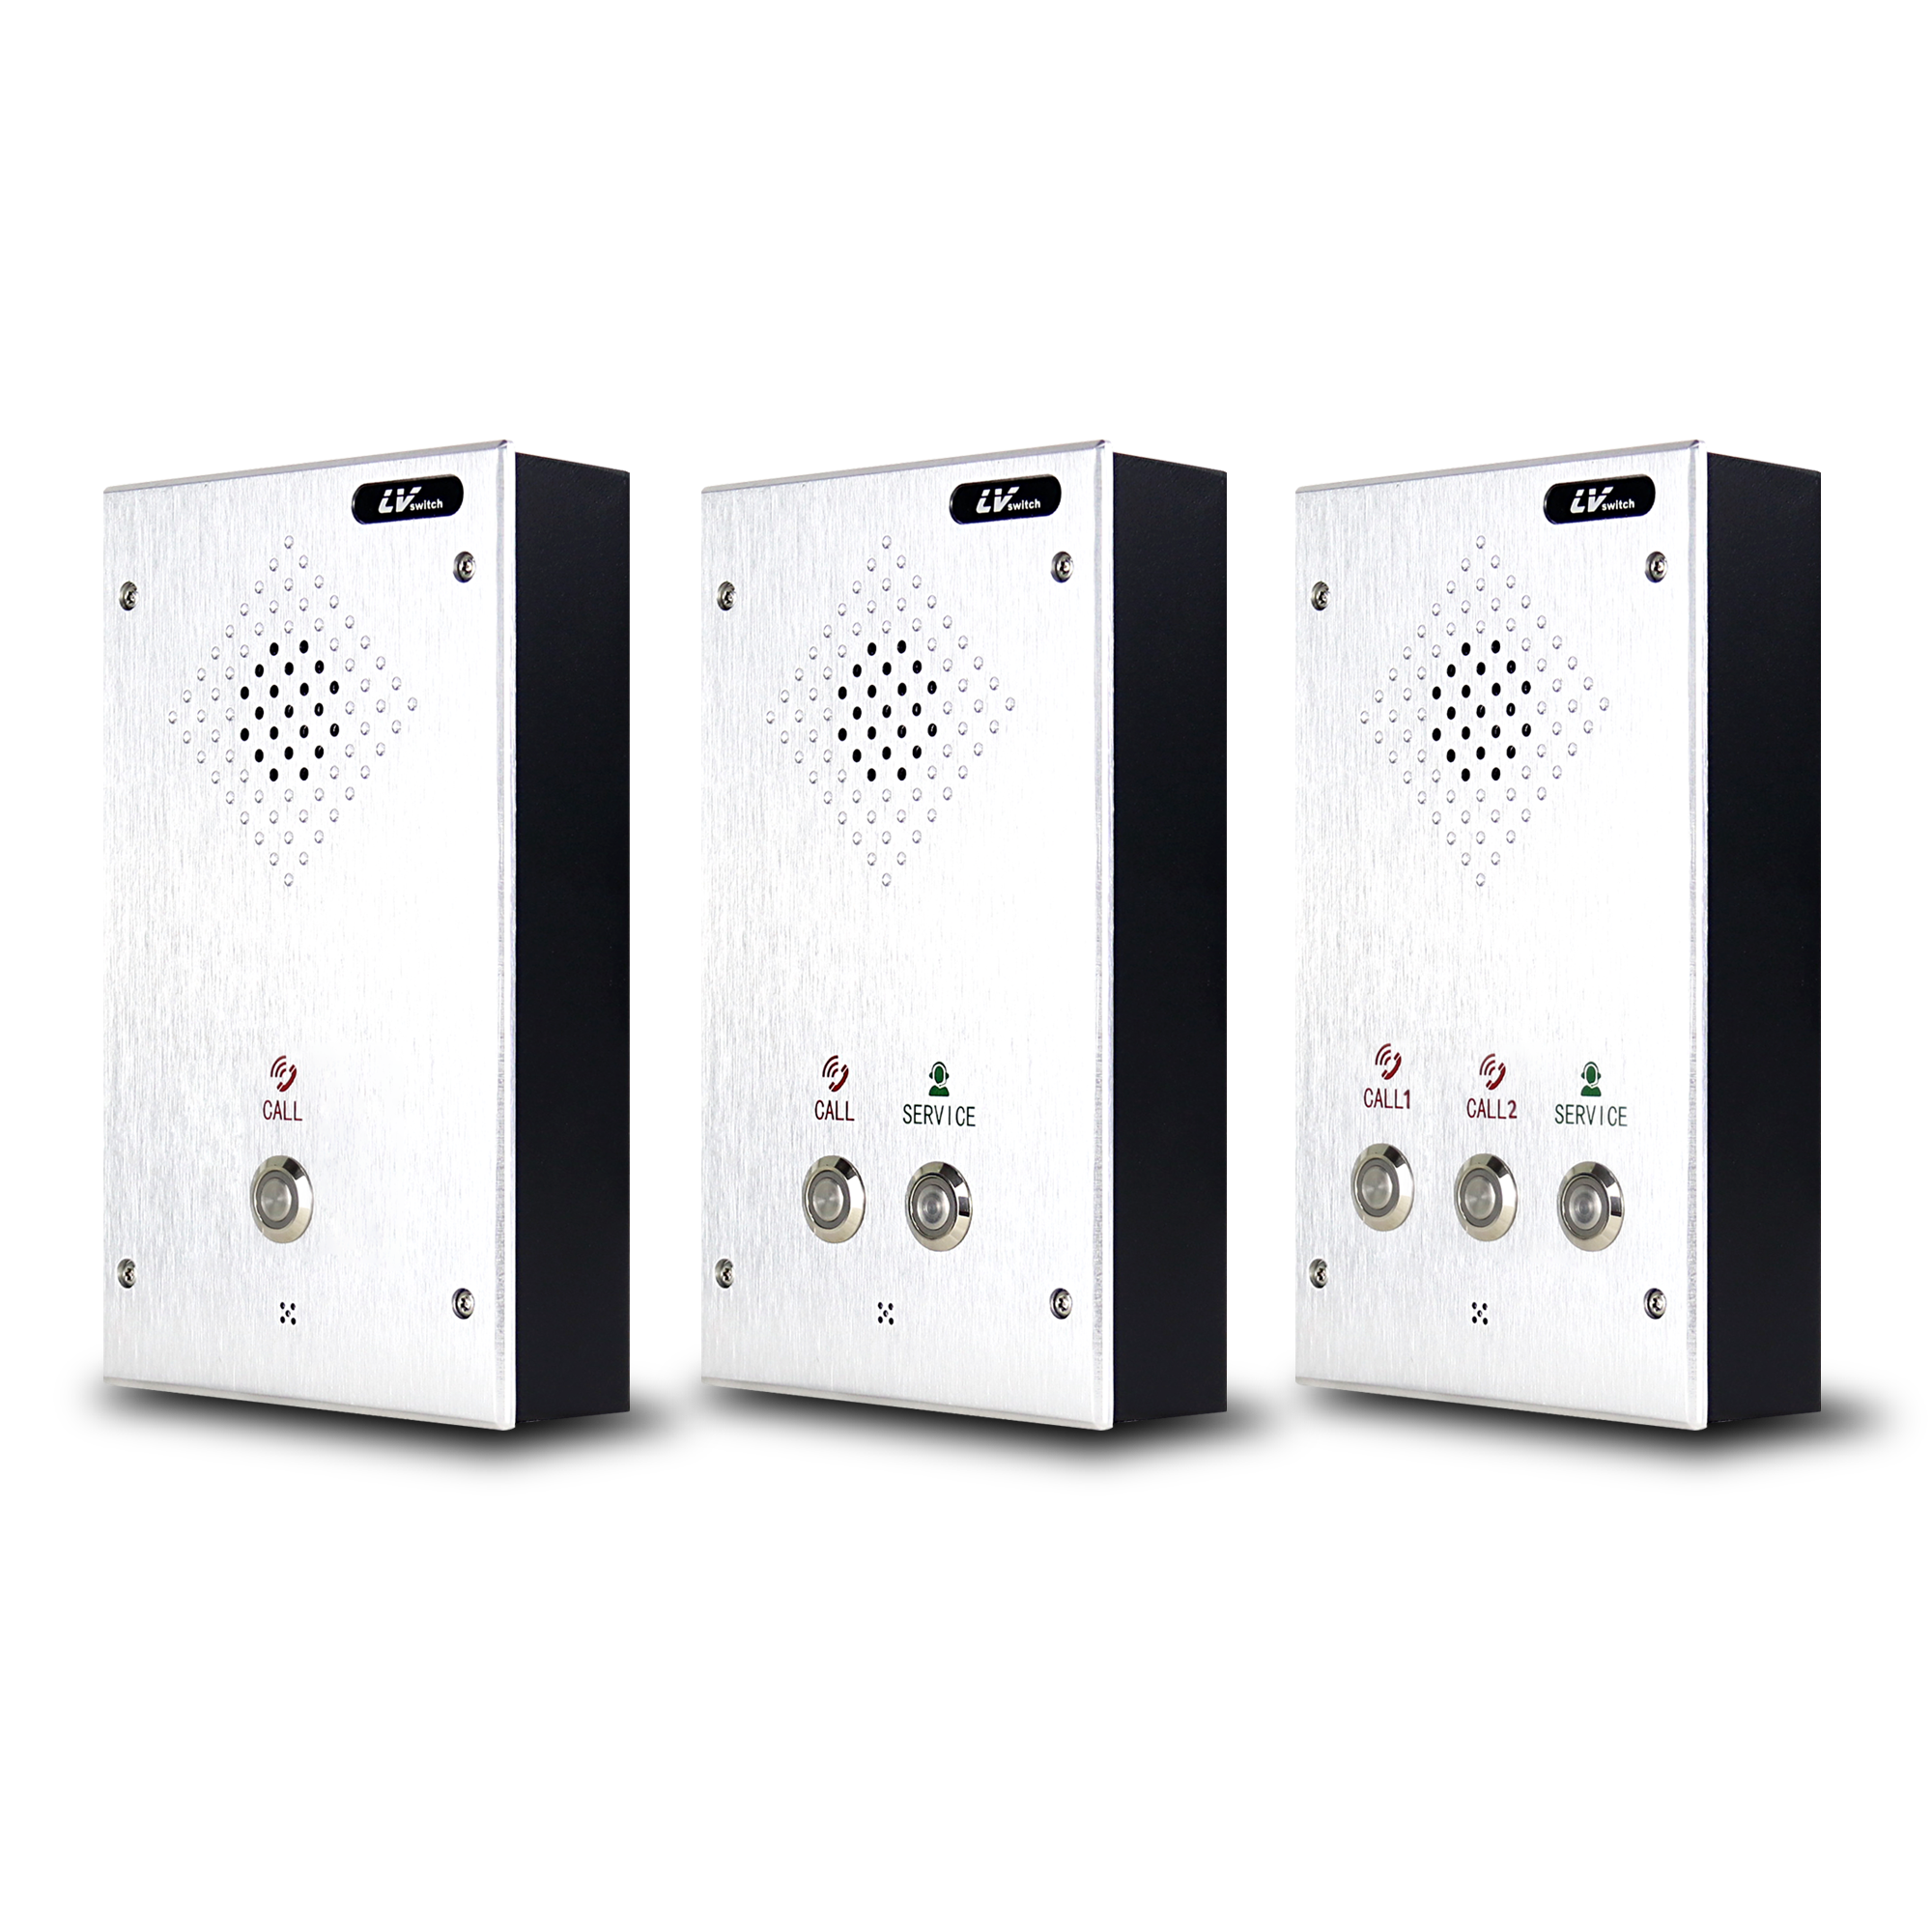  SIP-M100-1/2/3, a HD access control intercom with sturdy shell  can be highly compatible